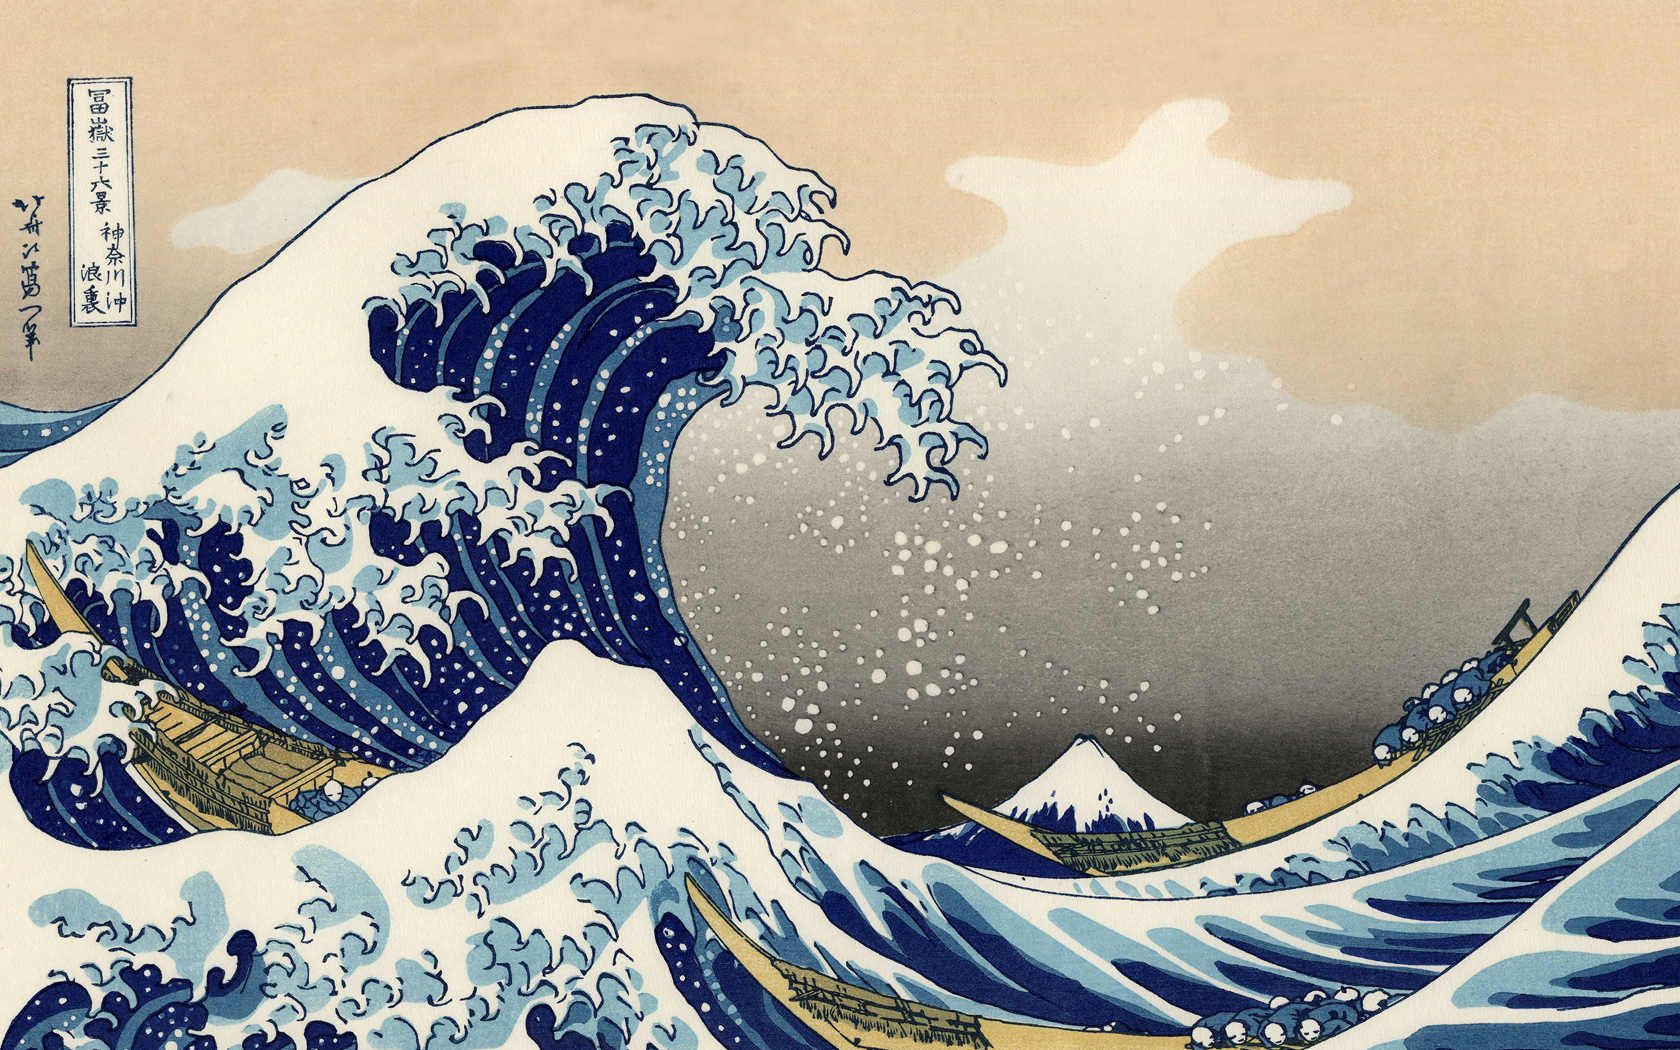 Why The Great Wave?